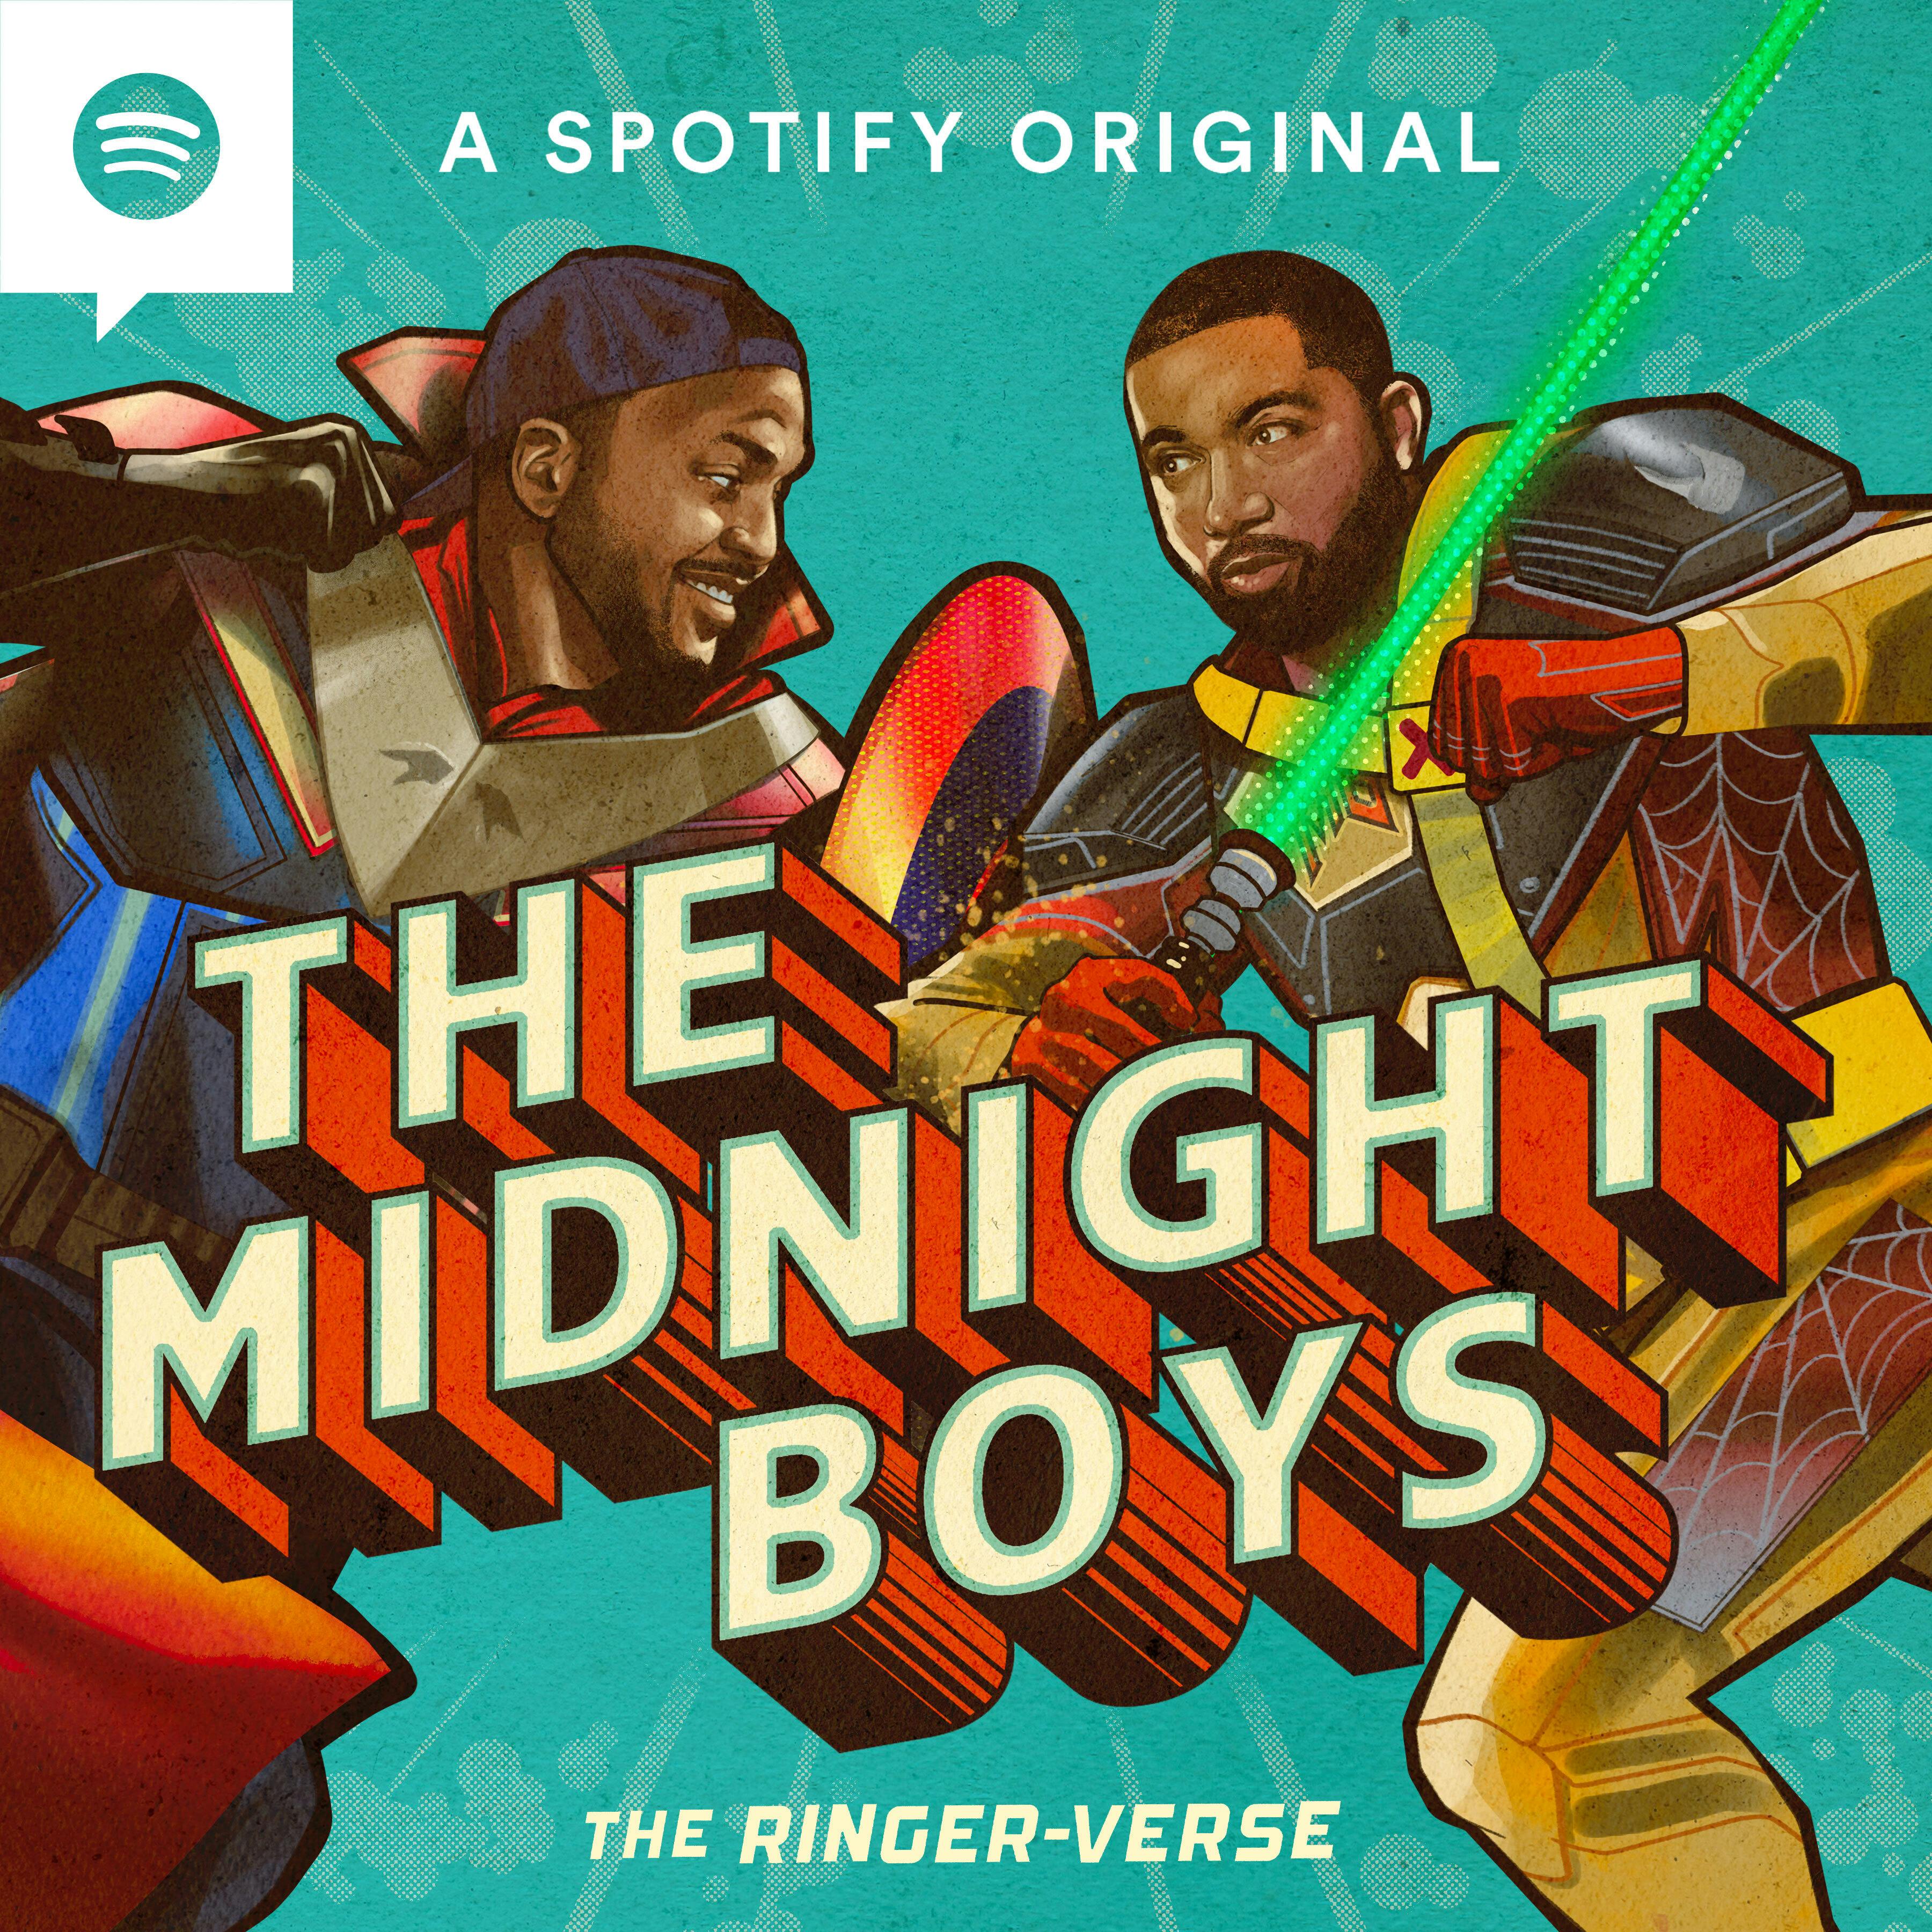 ’Secret Invasion’ Finale Reactions and ”Barbenheimer” Weekend | The Midnight Boys